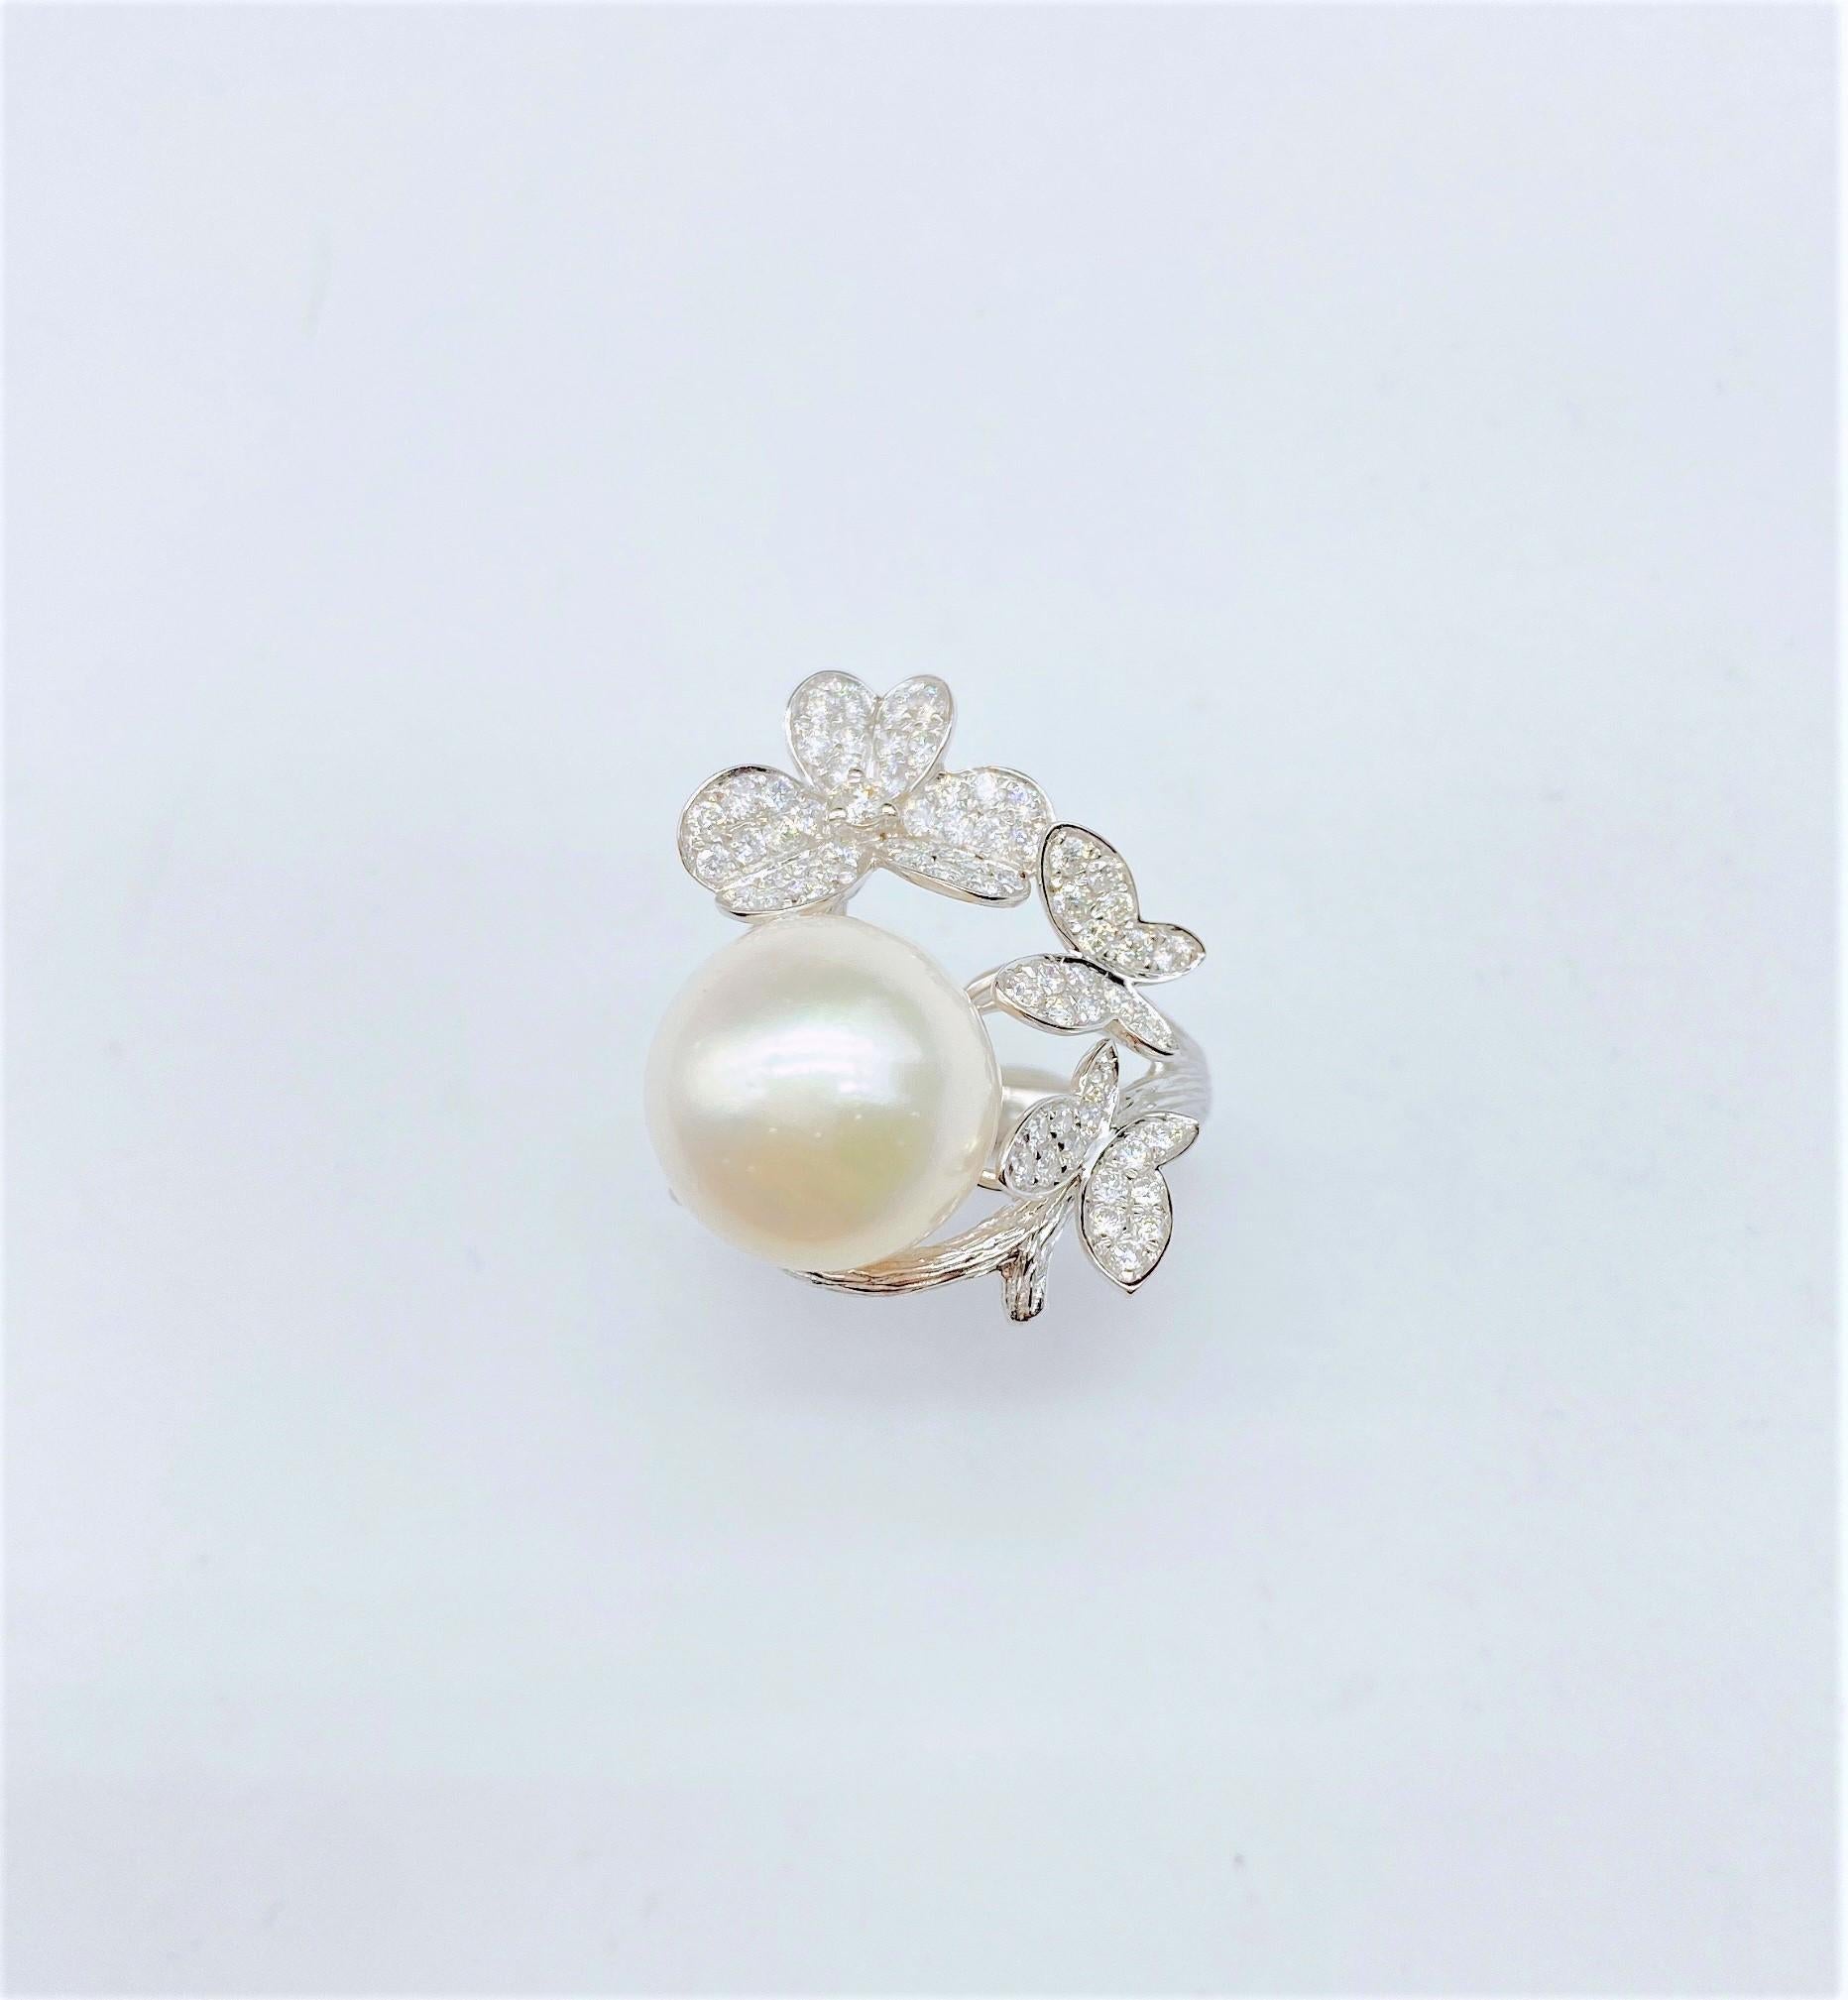 The Following Item we are offering is this Extremely Rare Beautiful 18KT Gold Fine Rare Fancy Large South Sea Pearl Fancy Butterfly Diamond Floral Flower Ring. This Magnificent Ring is comprised of Rare a Fine Large South Sea Pearl surrounded with